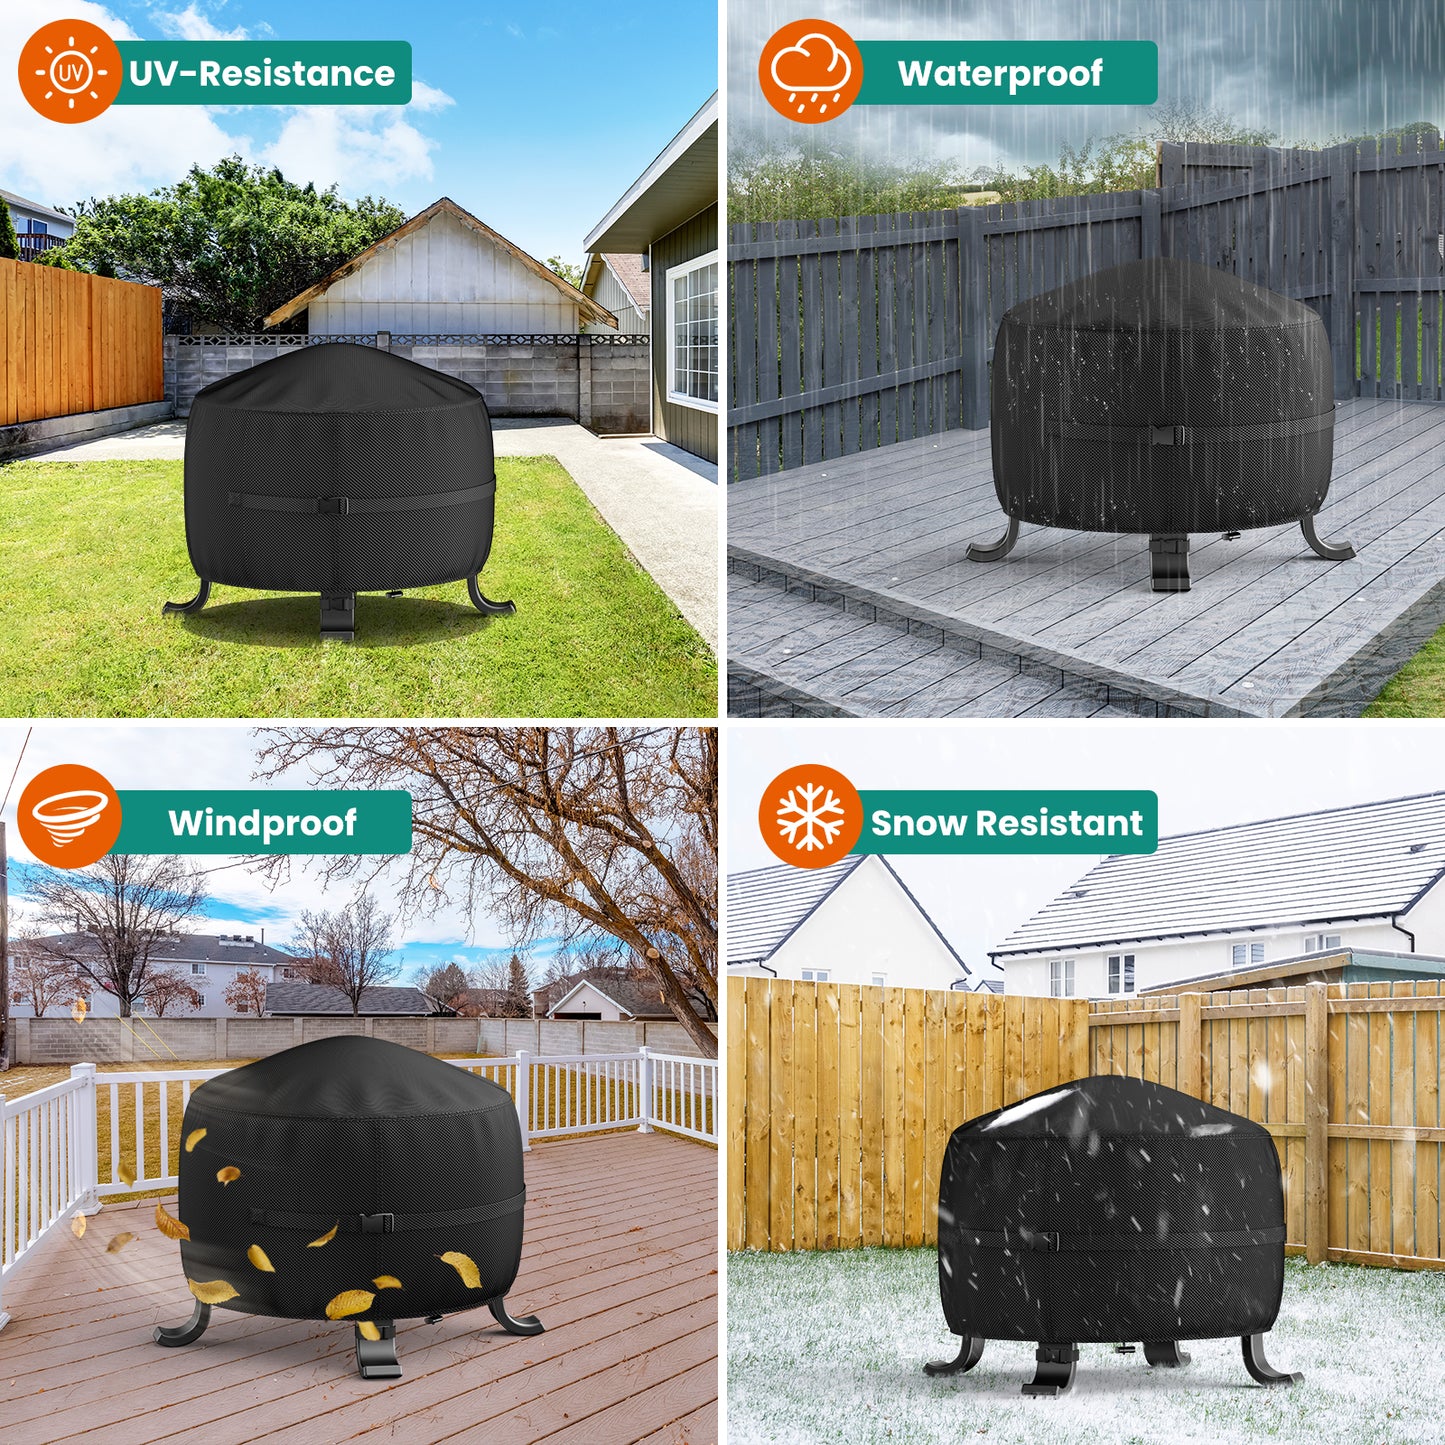 BROSYDA Fire Bowl Cover Waterproof （80 x 50 cm）